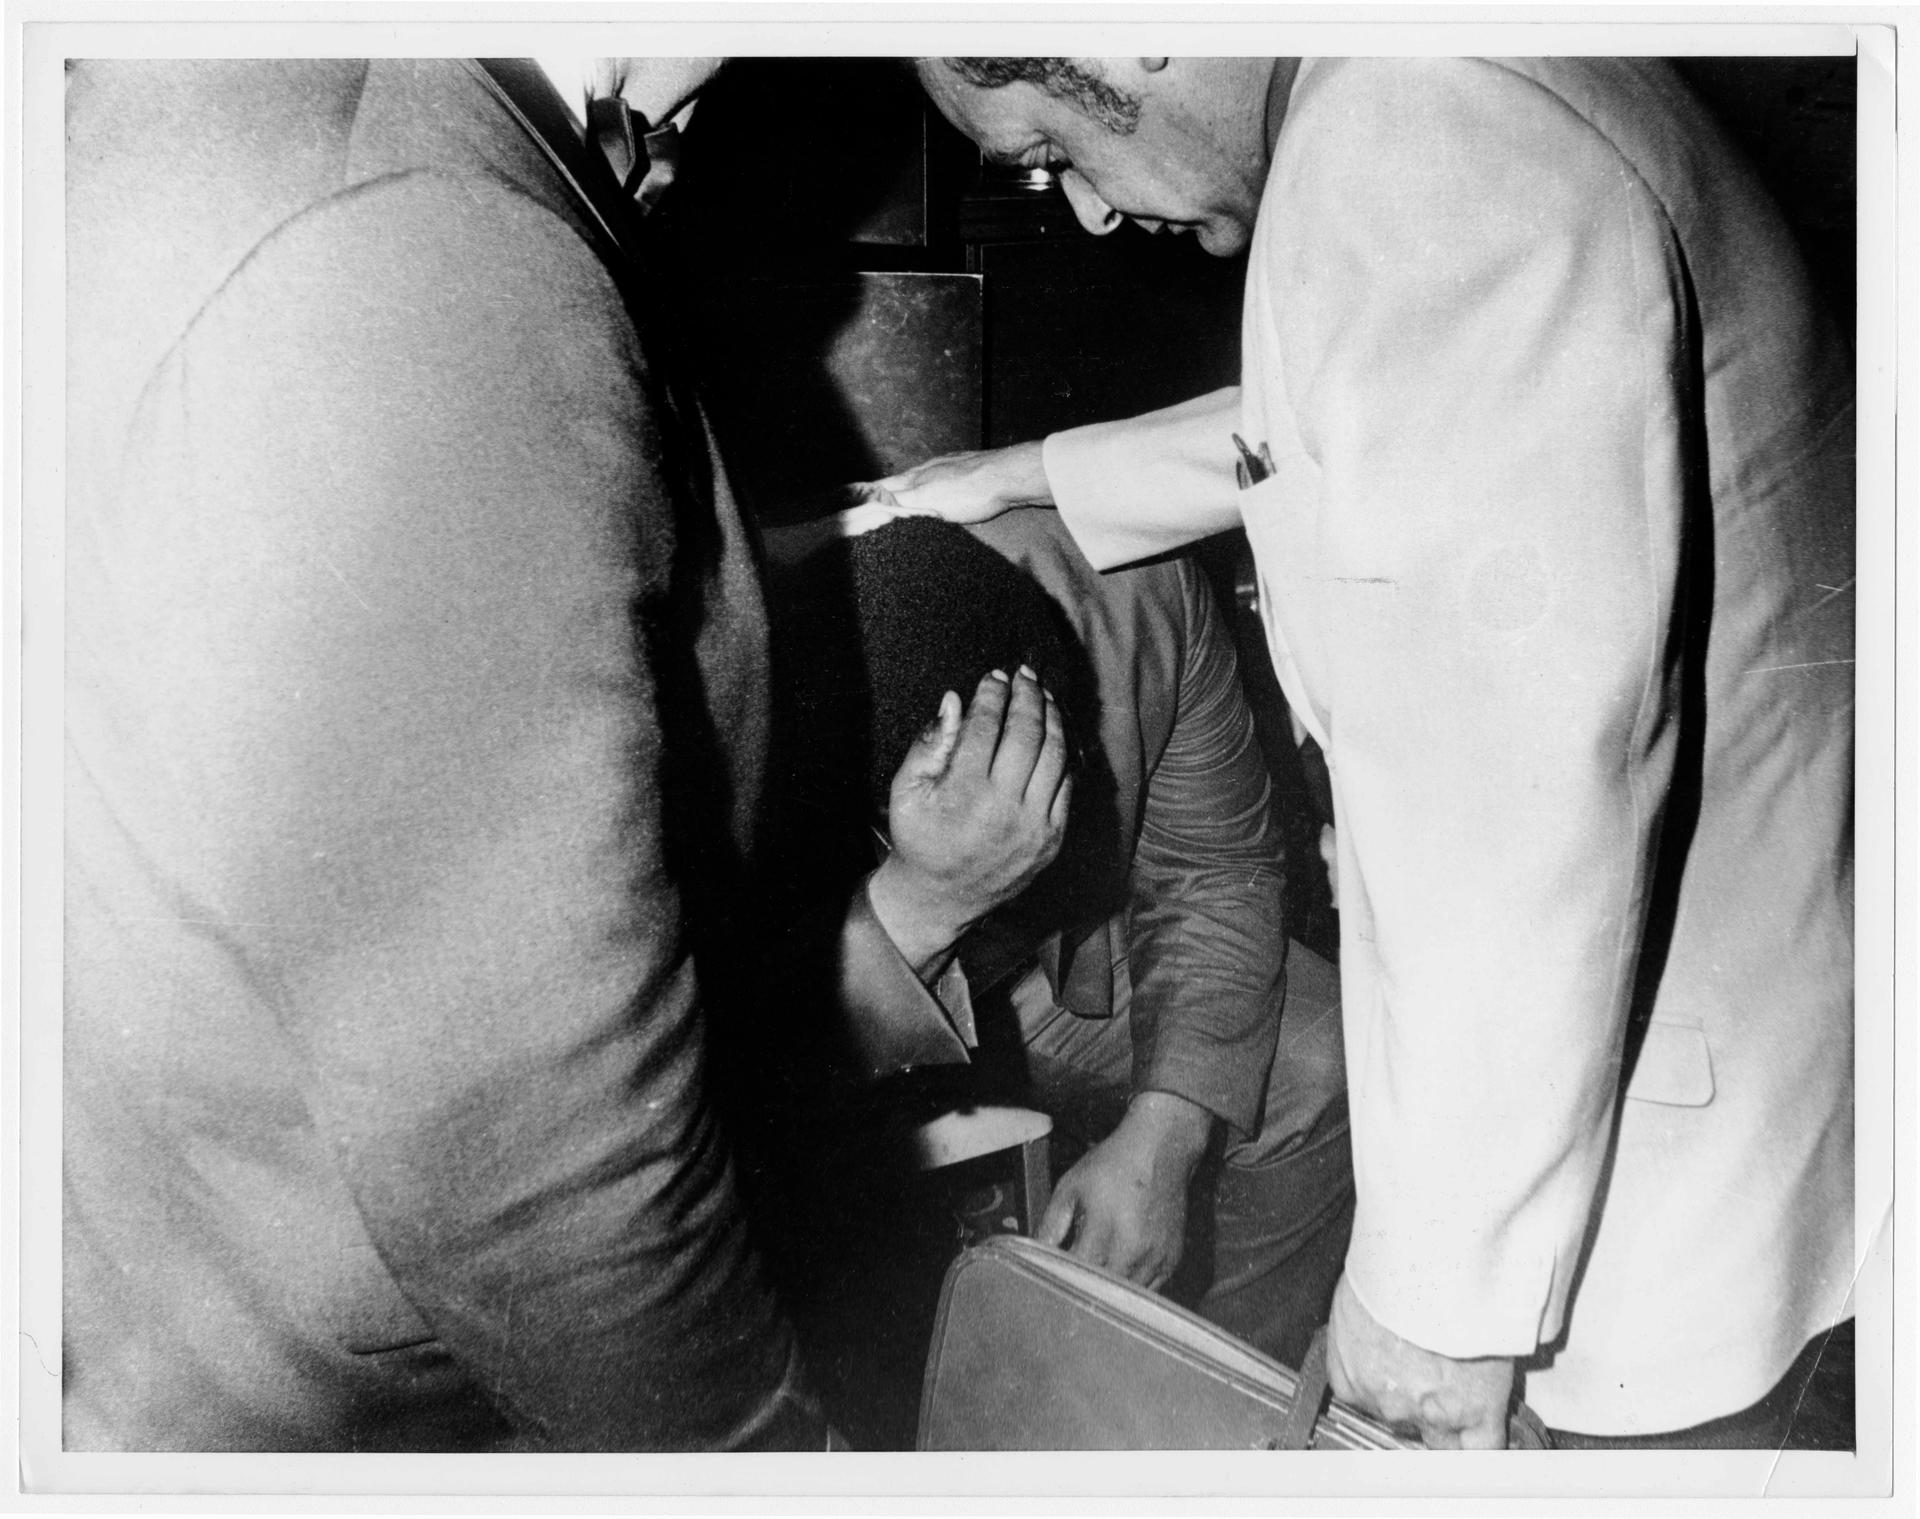 Roosevelt Grier, one of Robert Kennedy’s entourage who helped wrestle the gun out of Sirhan’s hands, breaks down after the shooting.